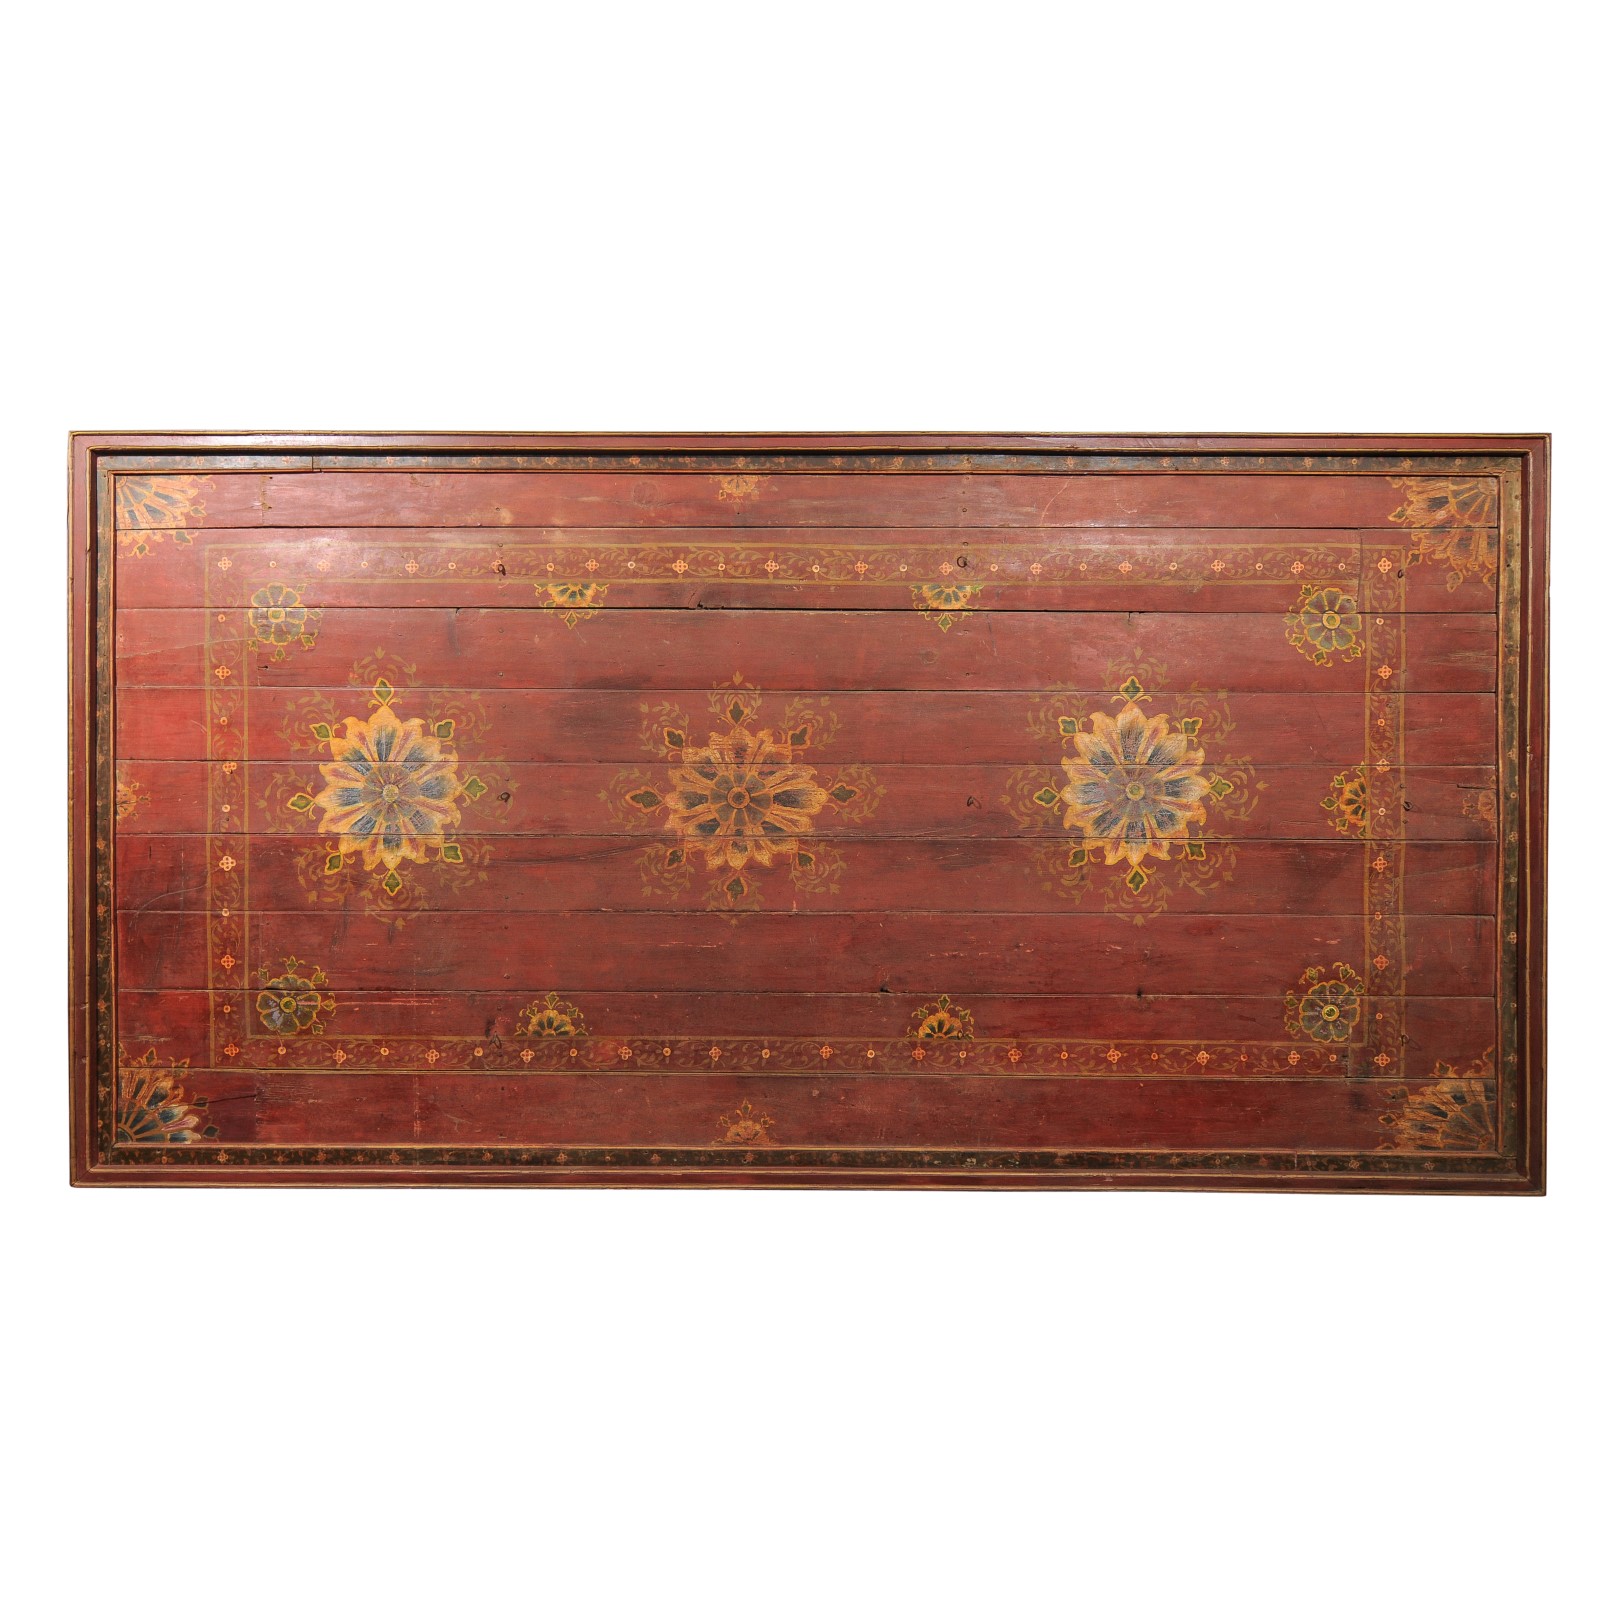 Large Antique Painted Ceiling Panel, India